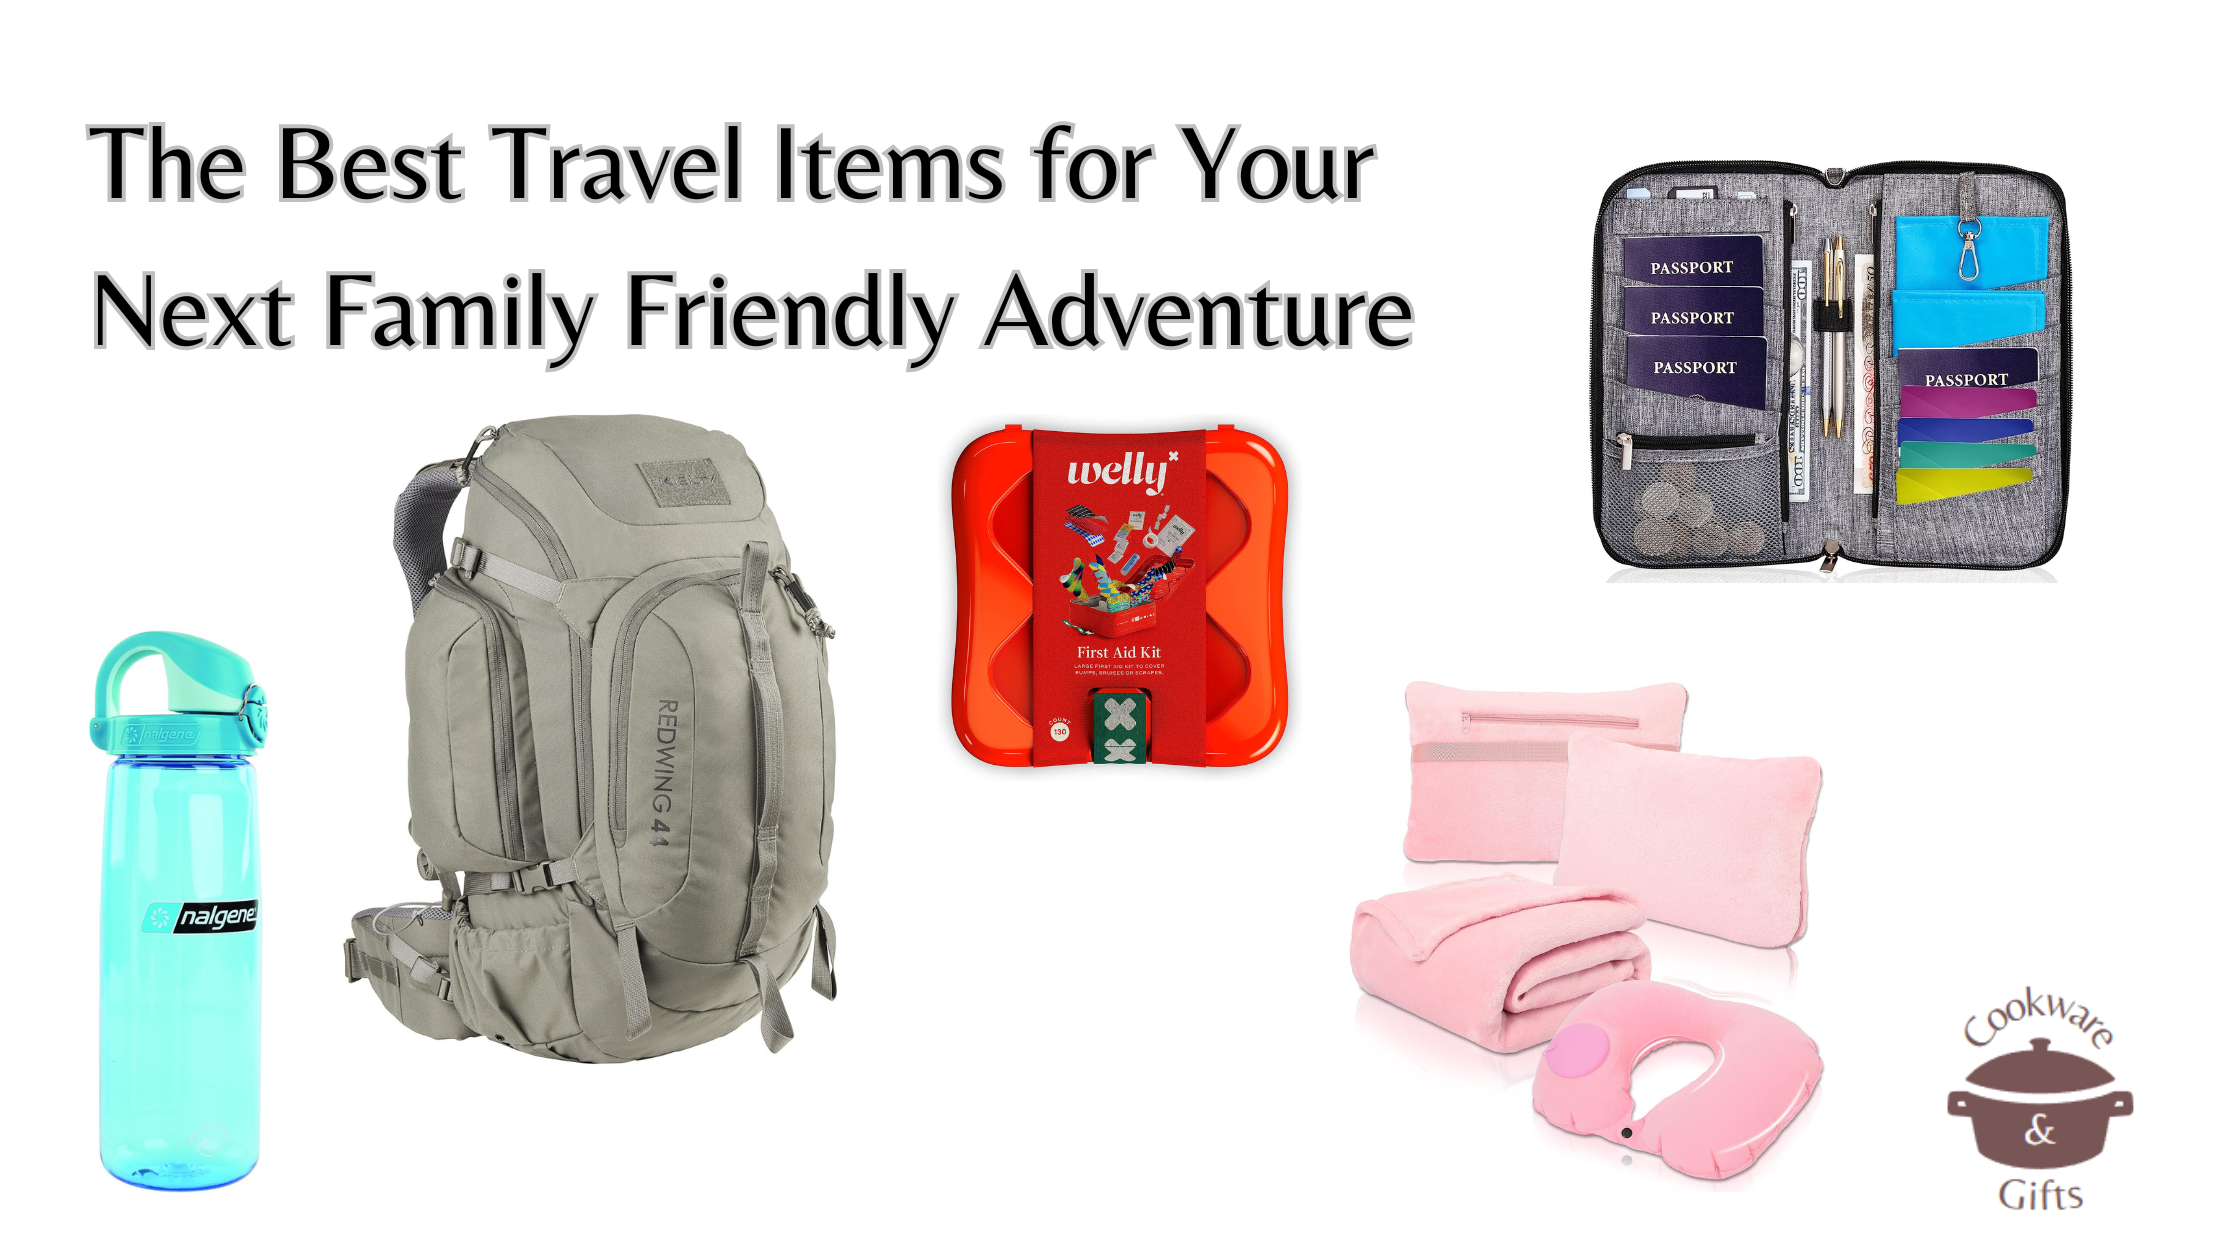 The Best Travel Items for Your Next Family Friendly Adventure